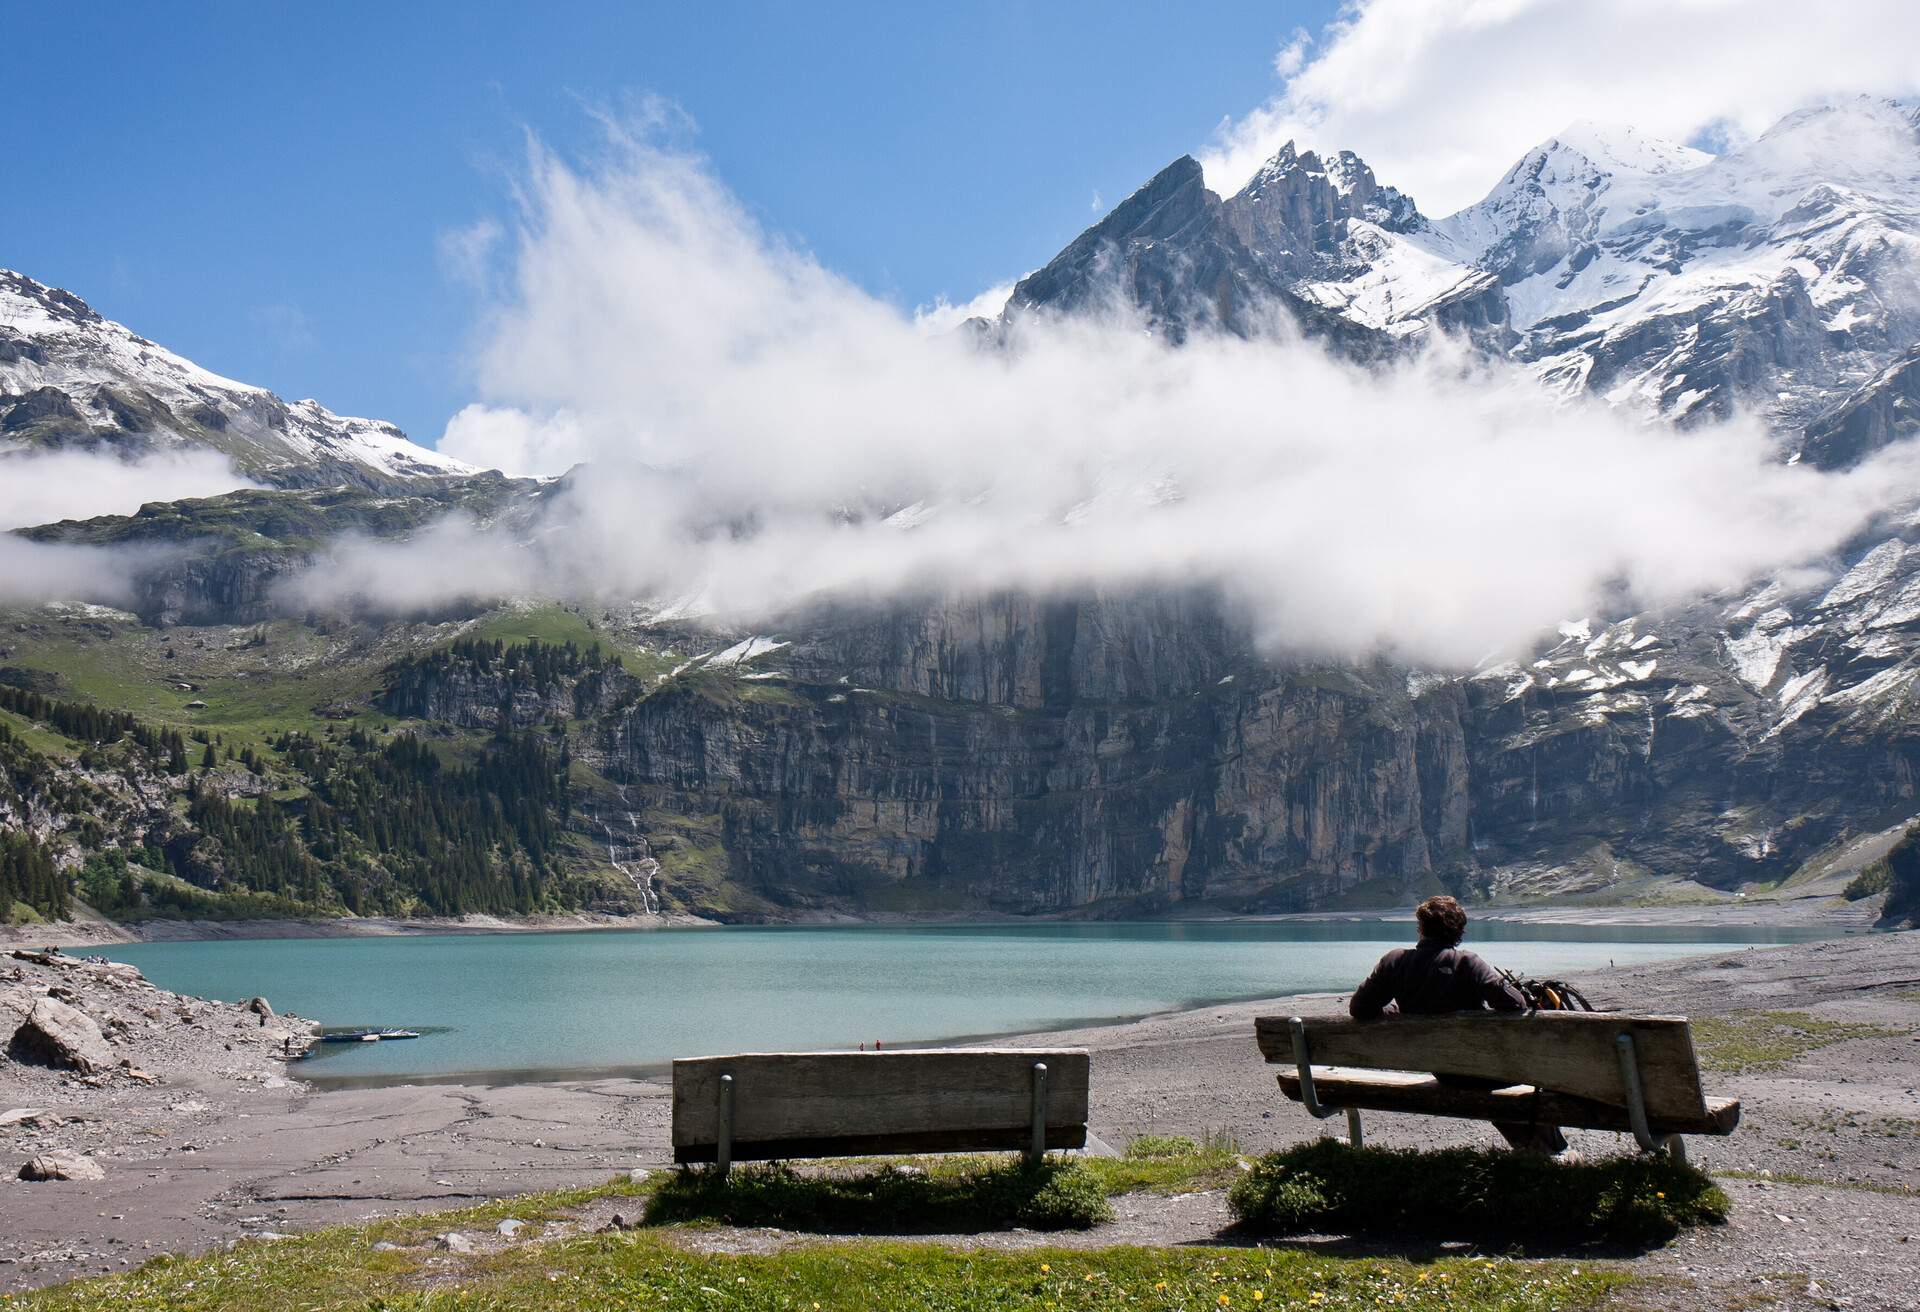 Man relaxing in front of spectacular view of Swiss lakes and mountains, Lake Oeschinen, Switzerland.